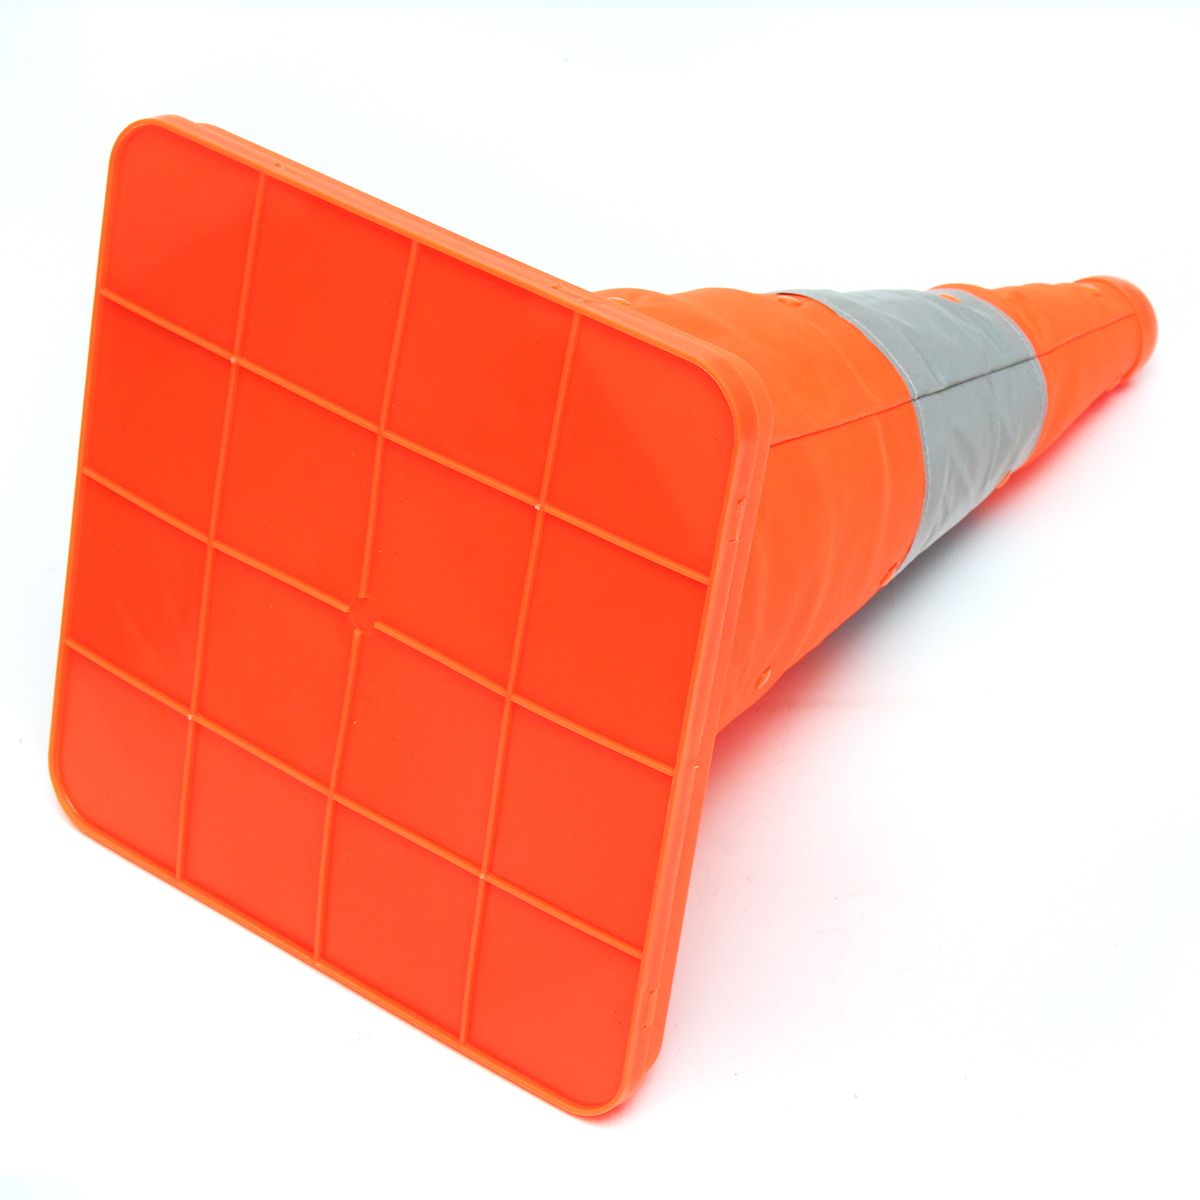 40CM-Folding-Collapsible-Highway-Road-Reflective-Tape-Safety-Cone-Traffic-Pop-Up-Multipurpose-1403178